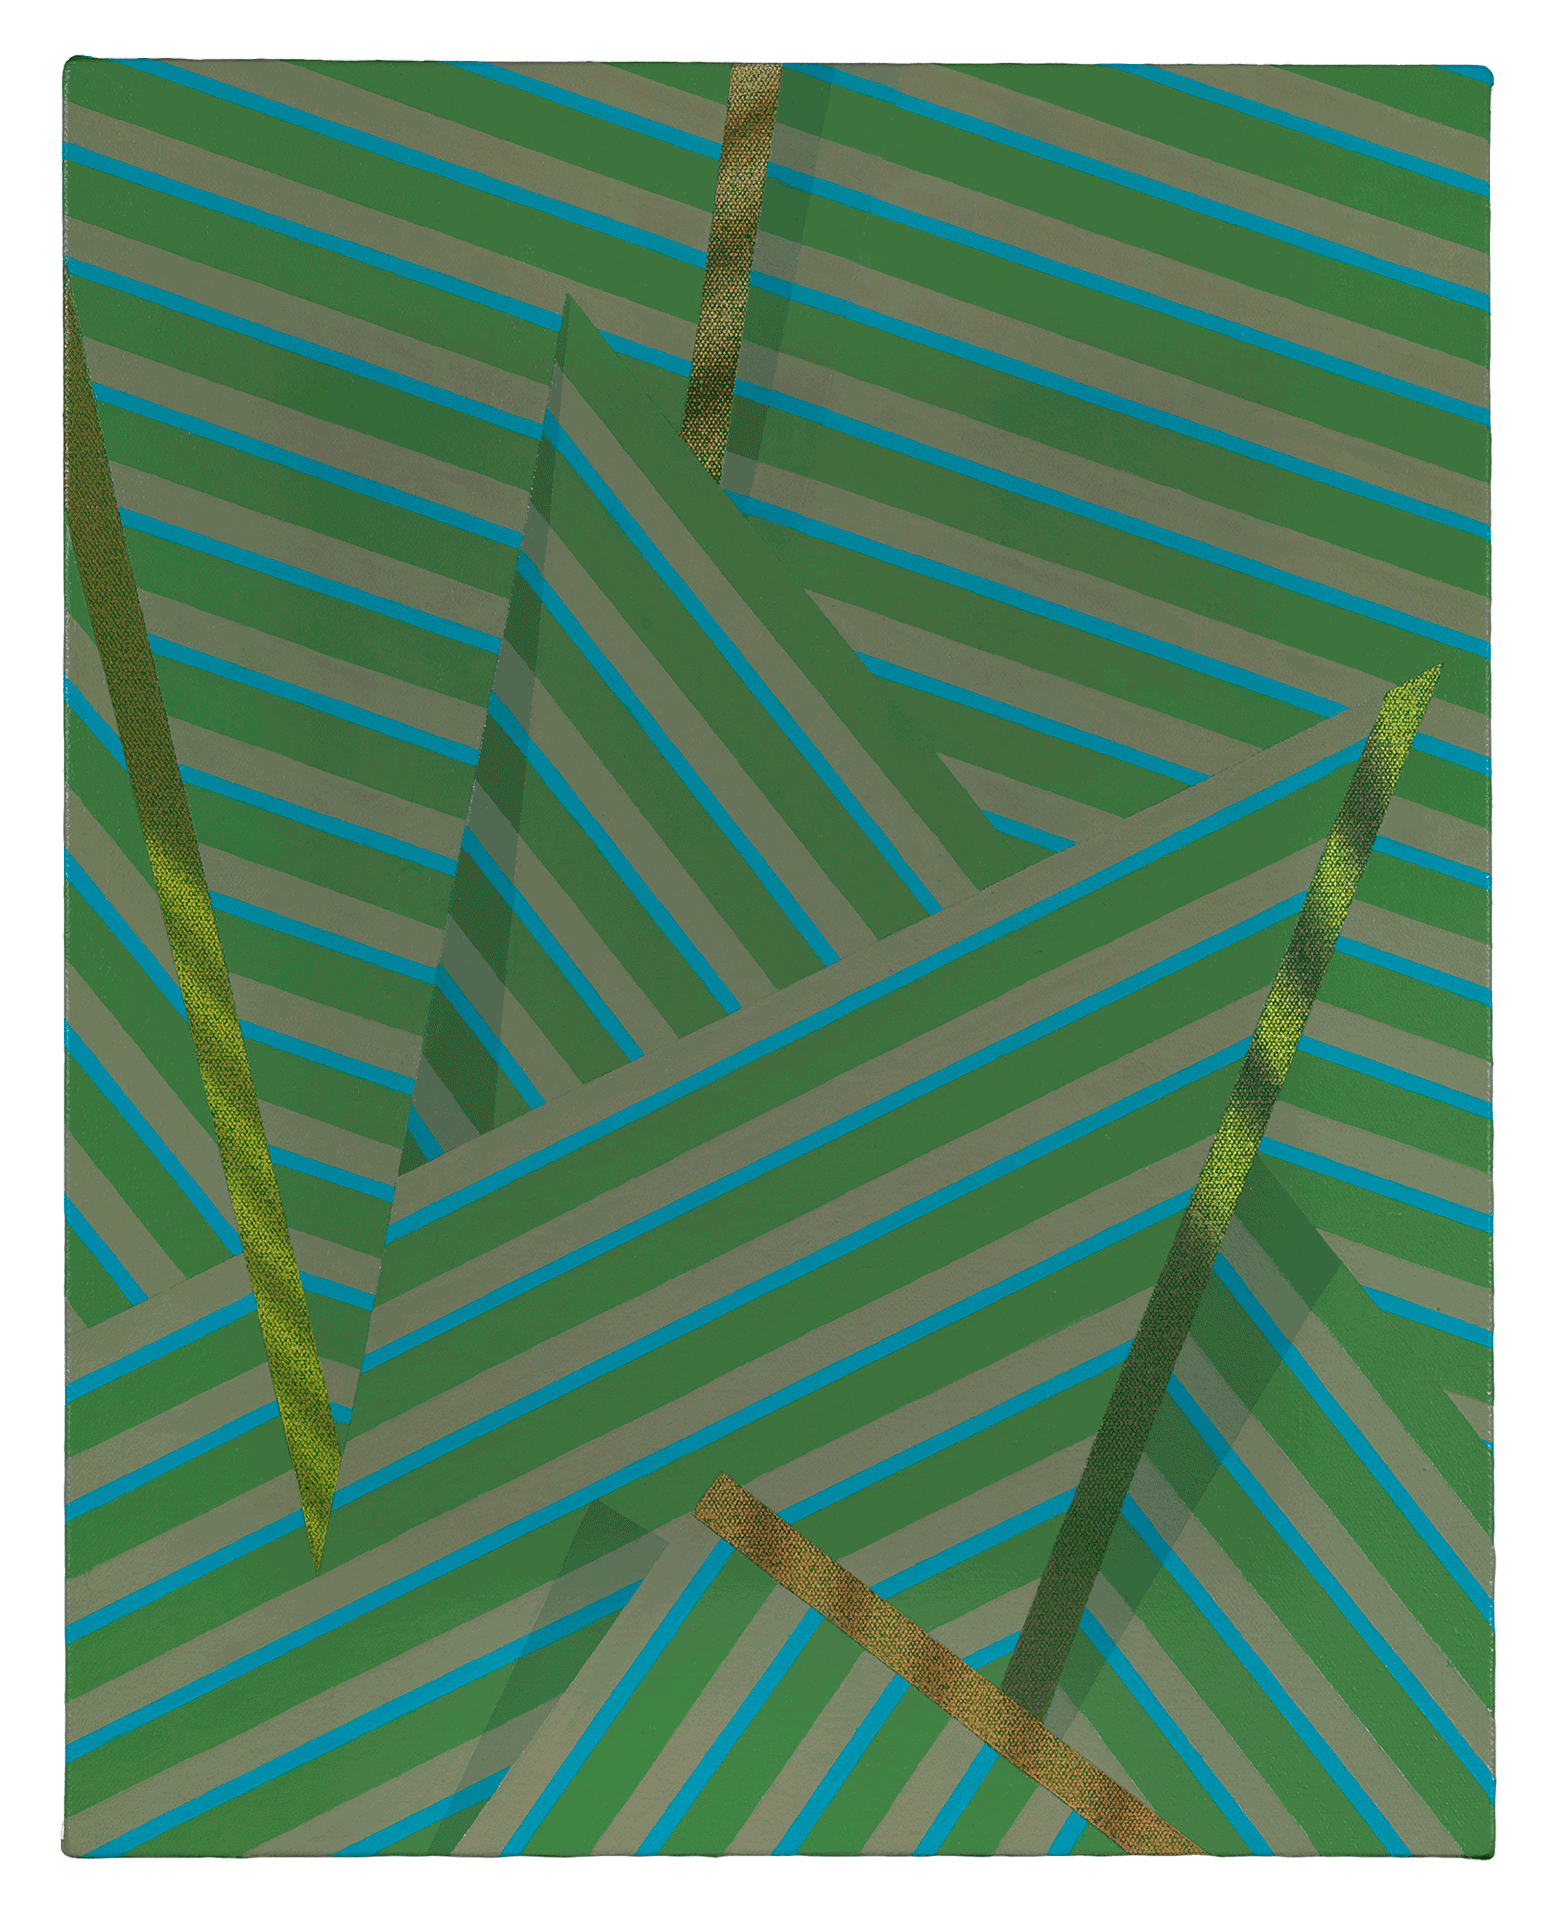 A painting by Tomma Abts, titled Ihne, dated 2012.